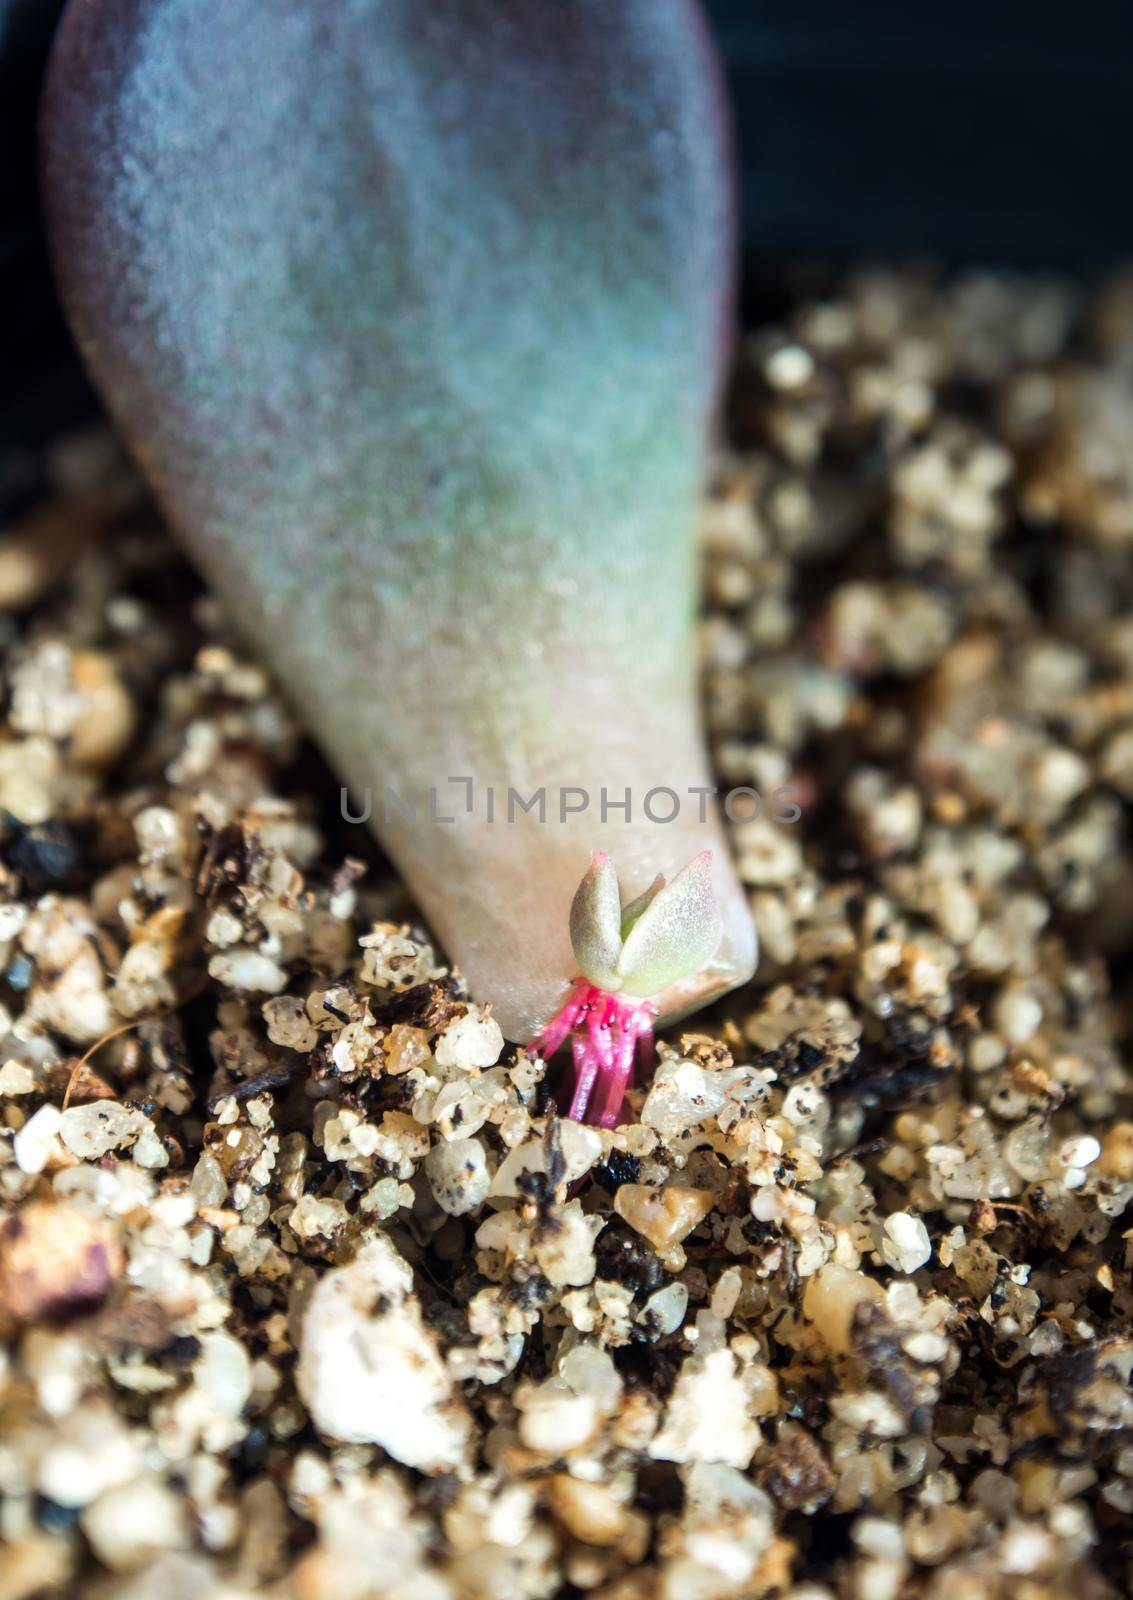 Small roots that grow from the base of the succulent plant leaf